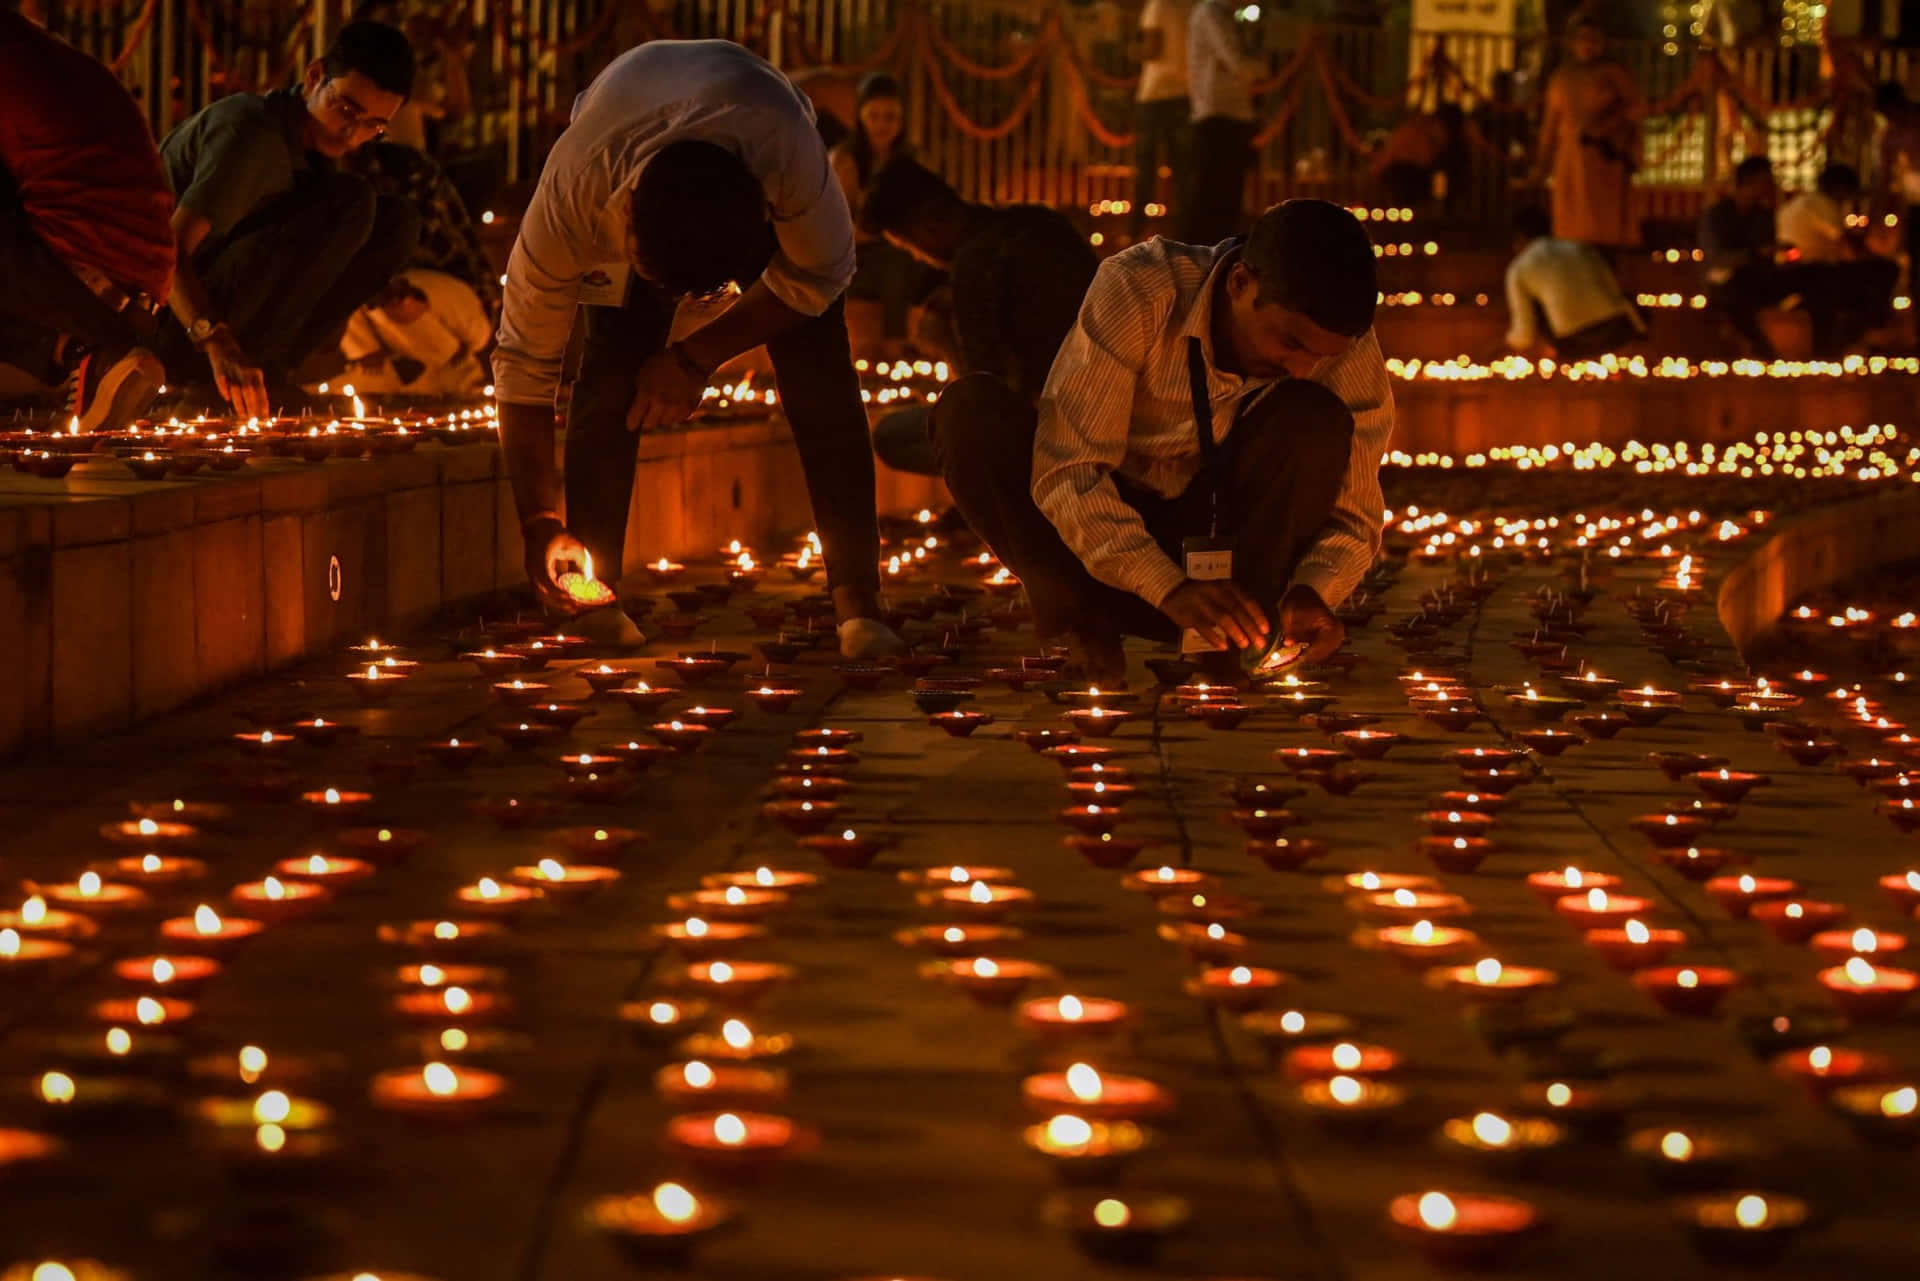 People Lighting Candles On The Ground In Front Of A Building